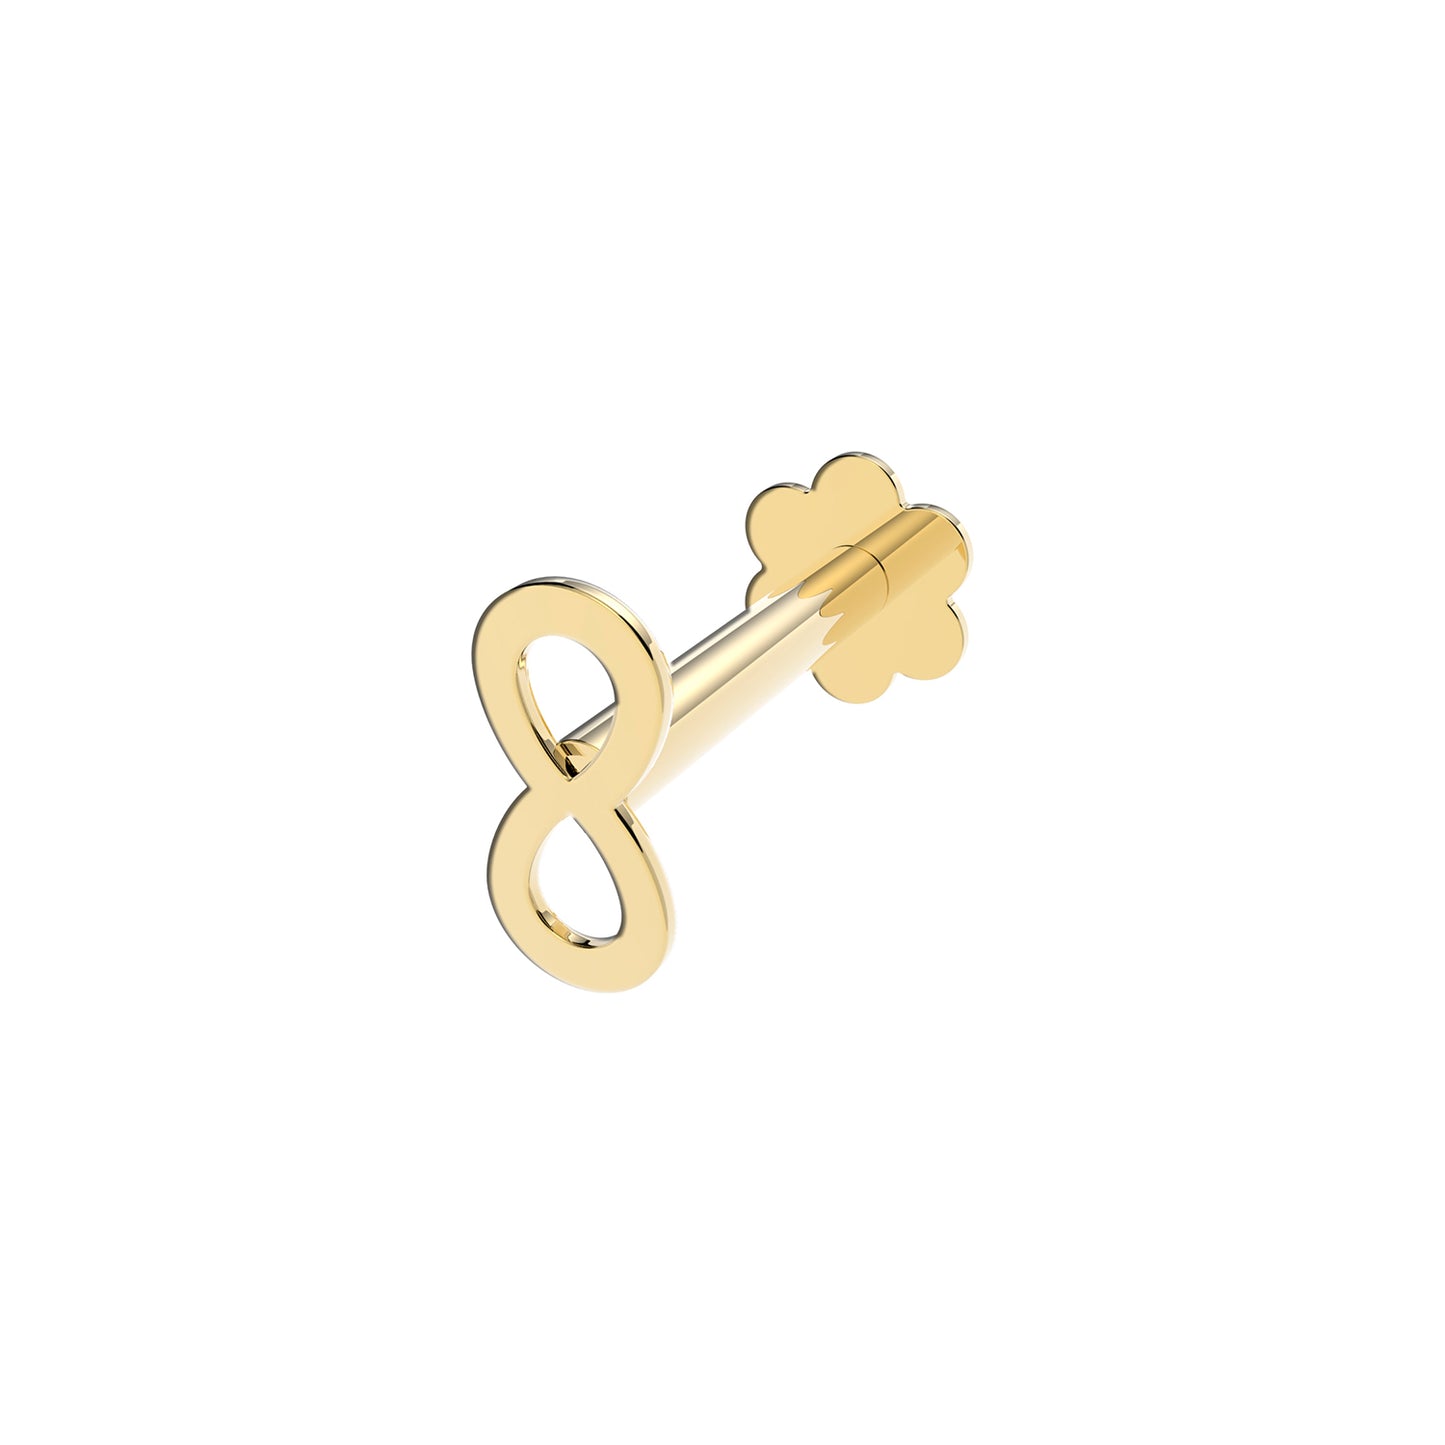 Ear Candy 9ct Gold Labret Cartilage Stud | Infinity - John Ross Jewellers